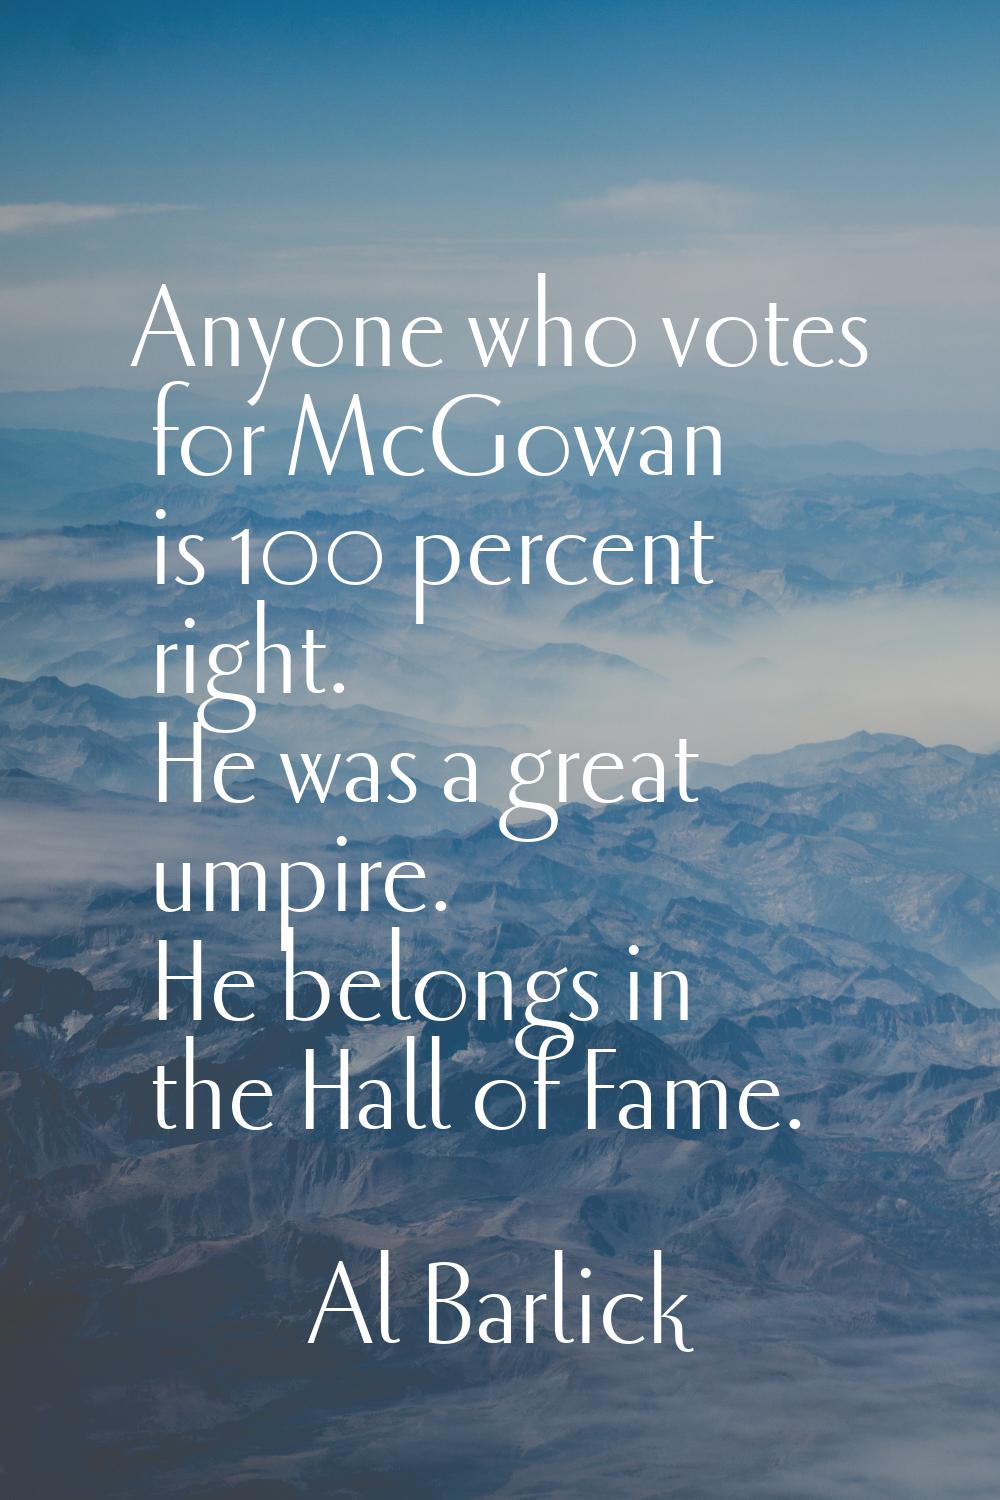 Anyone who votes for McGowan is 100 percent right. He was a great umpire. He belongs in the Hall of